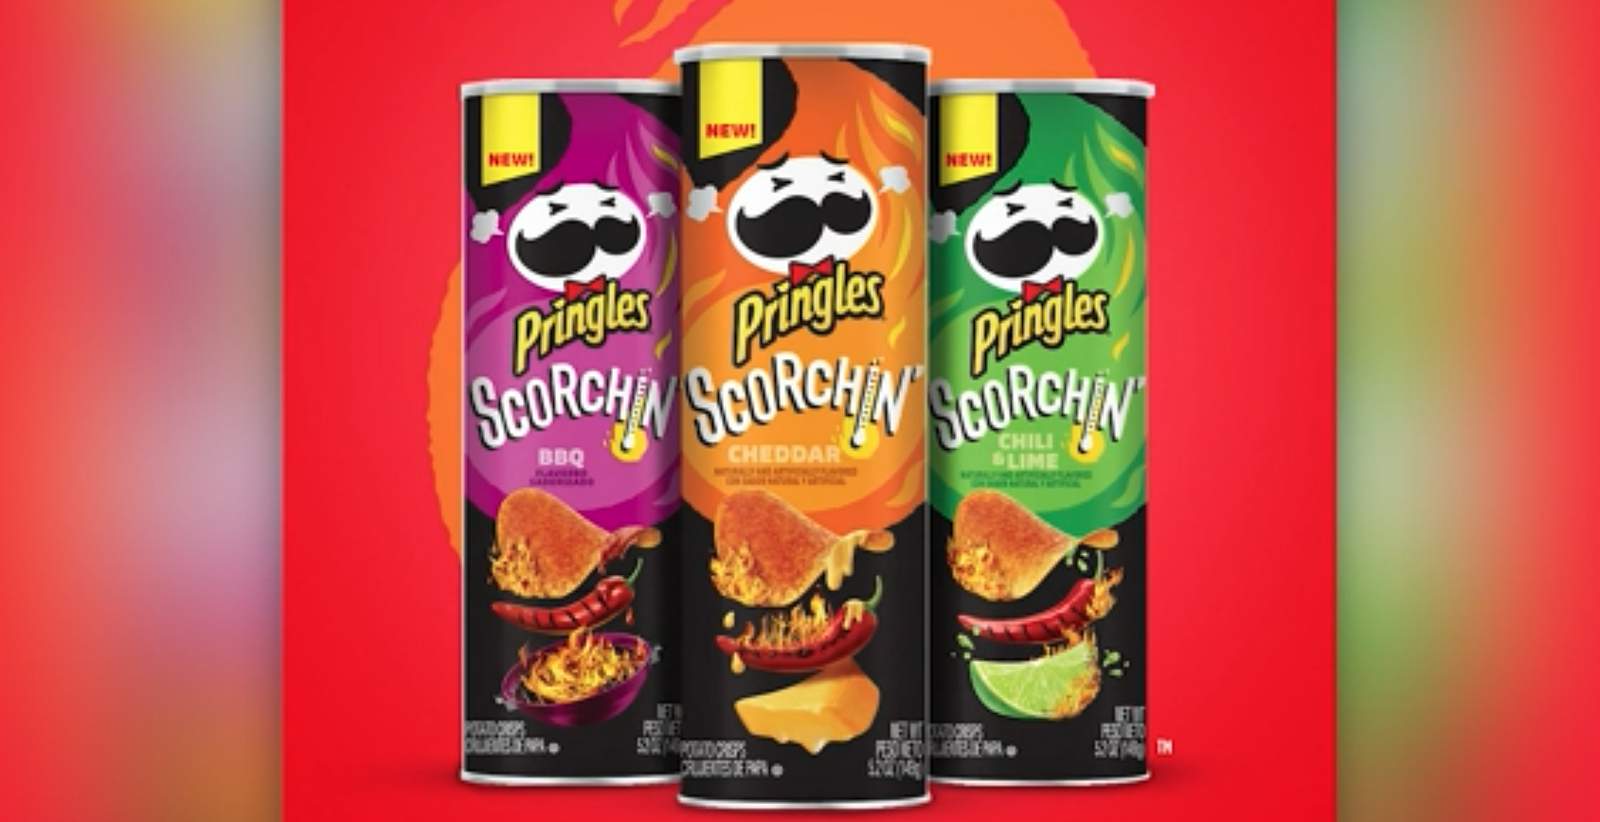 Pringles unveils new ‘Scorchin’ chip lineup